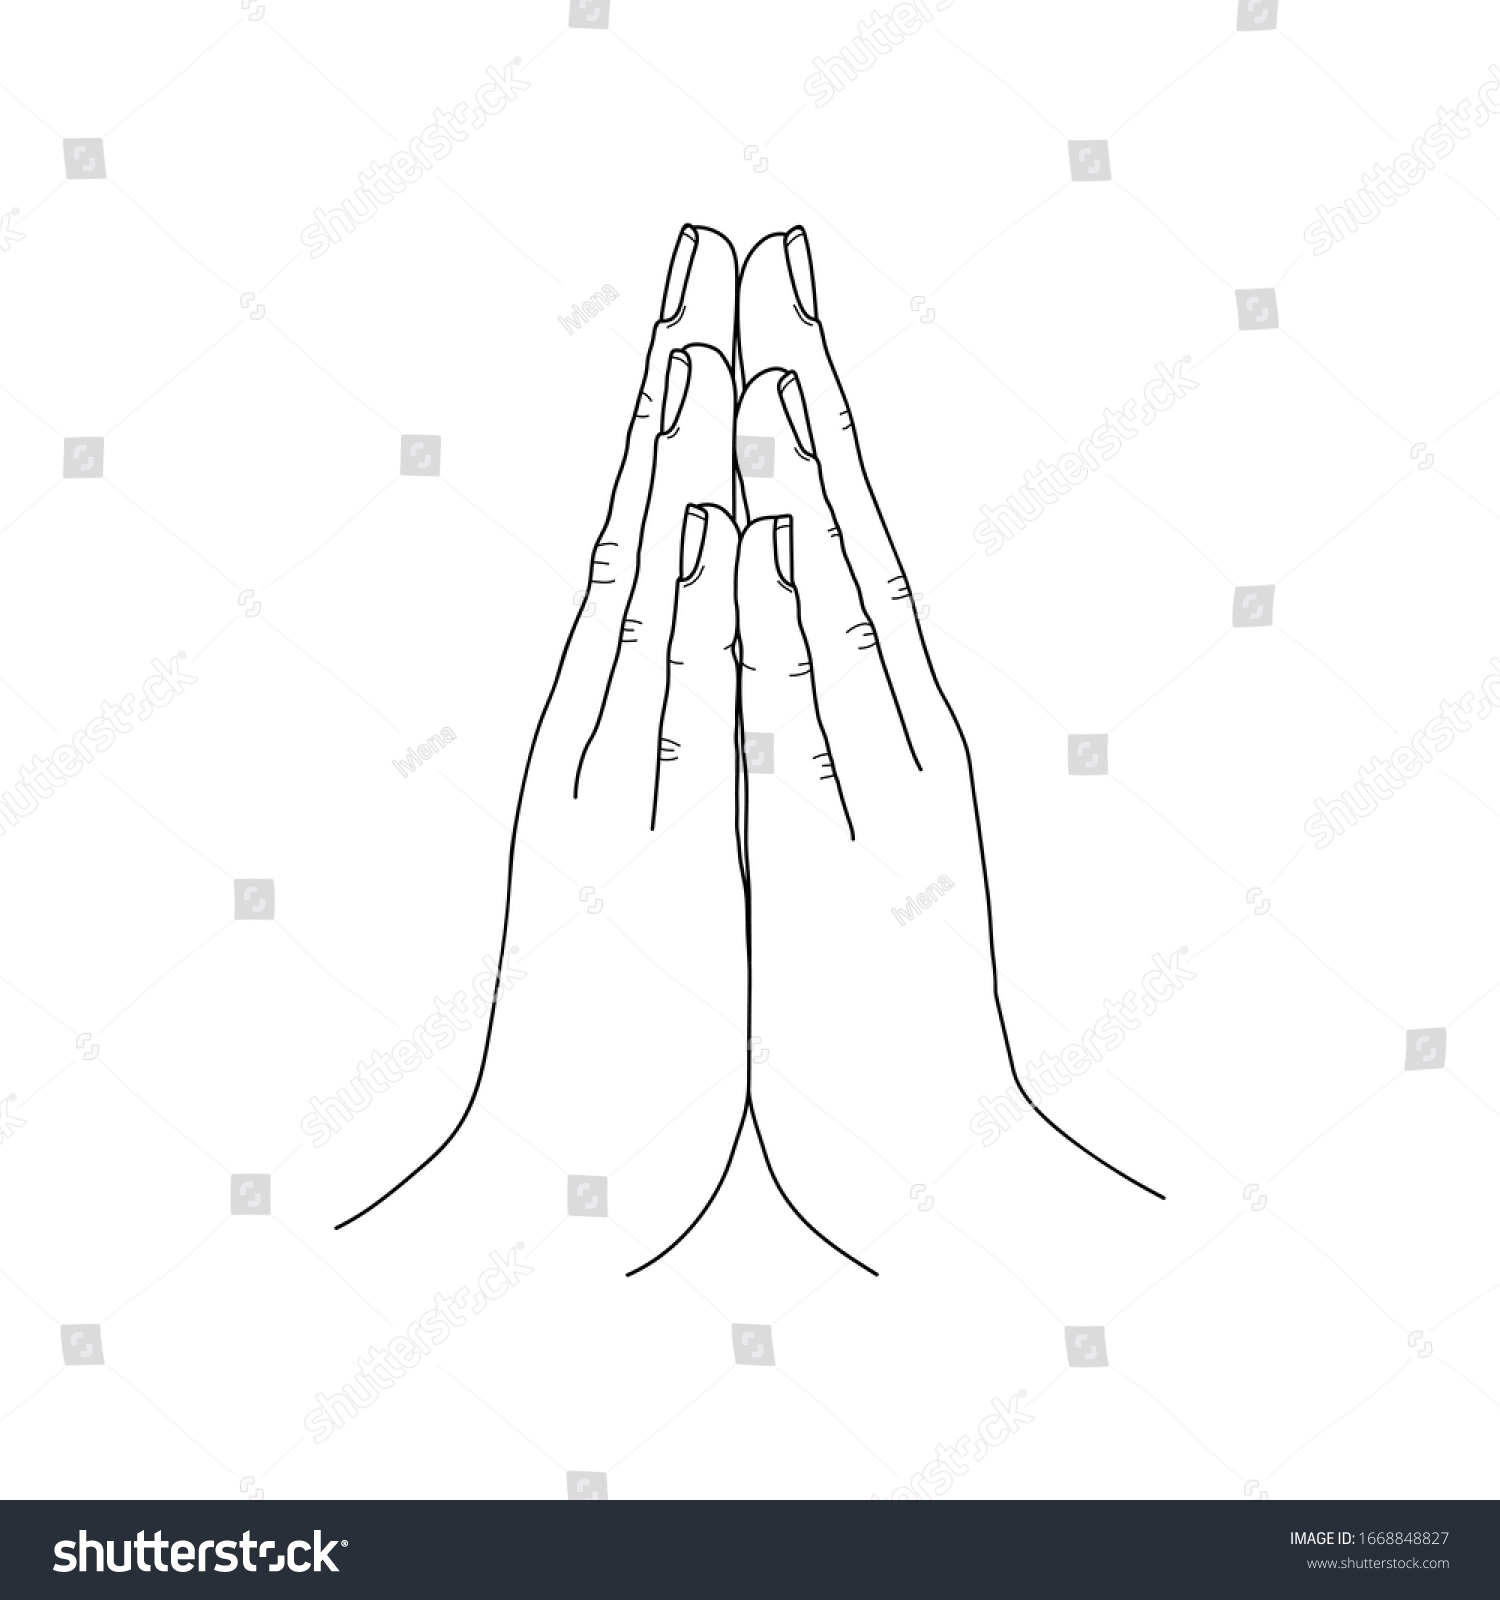 Namaste drawing Images, Stock Photos & Vectors Shutterstock